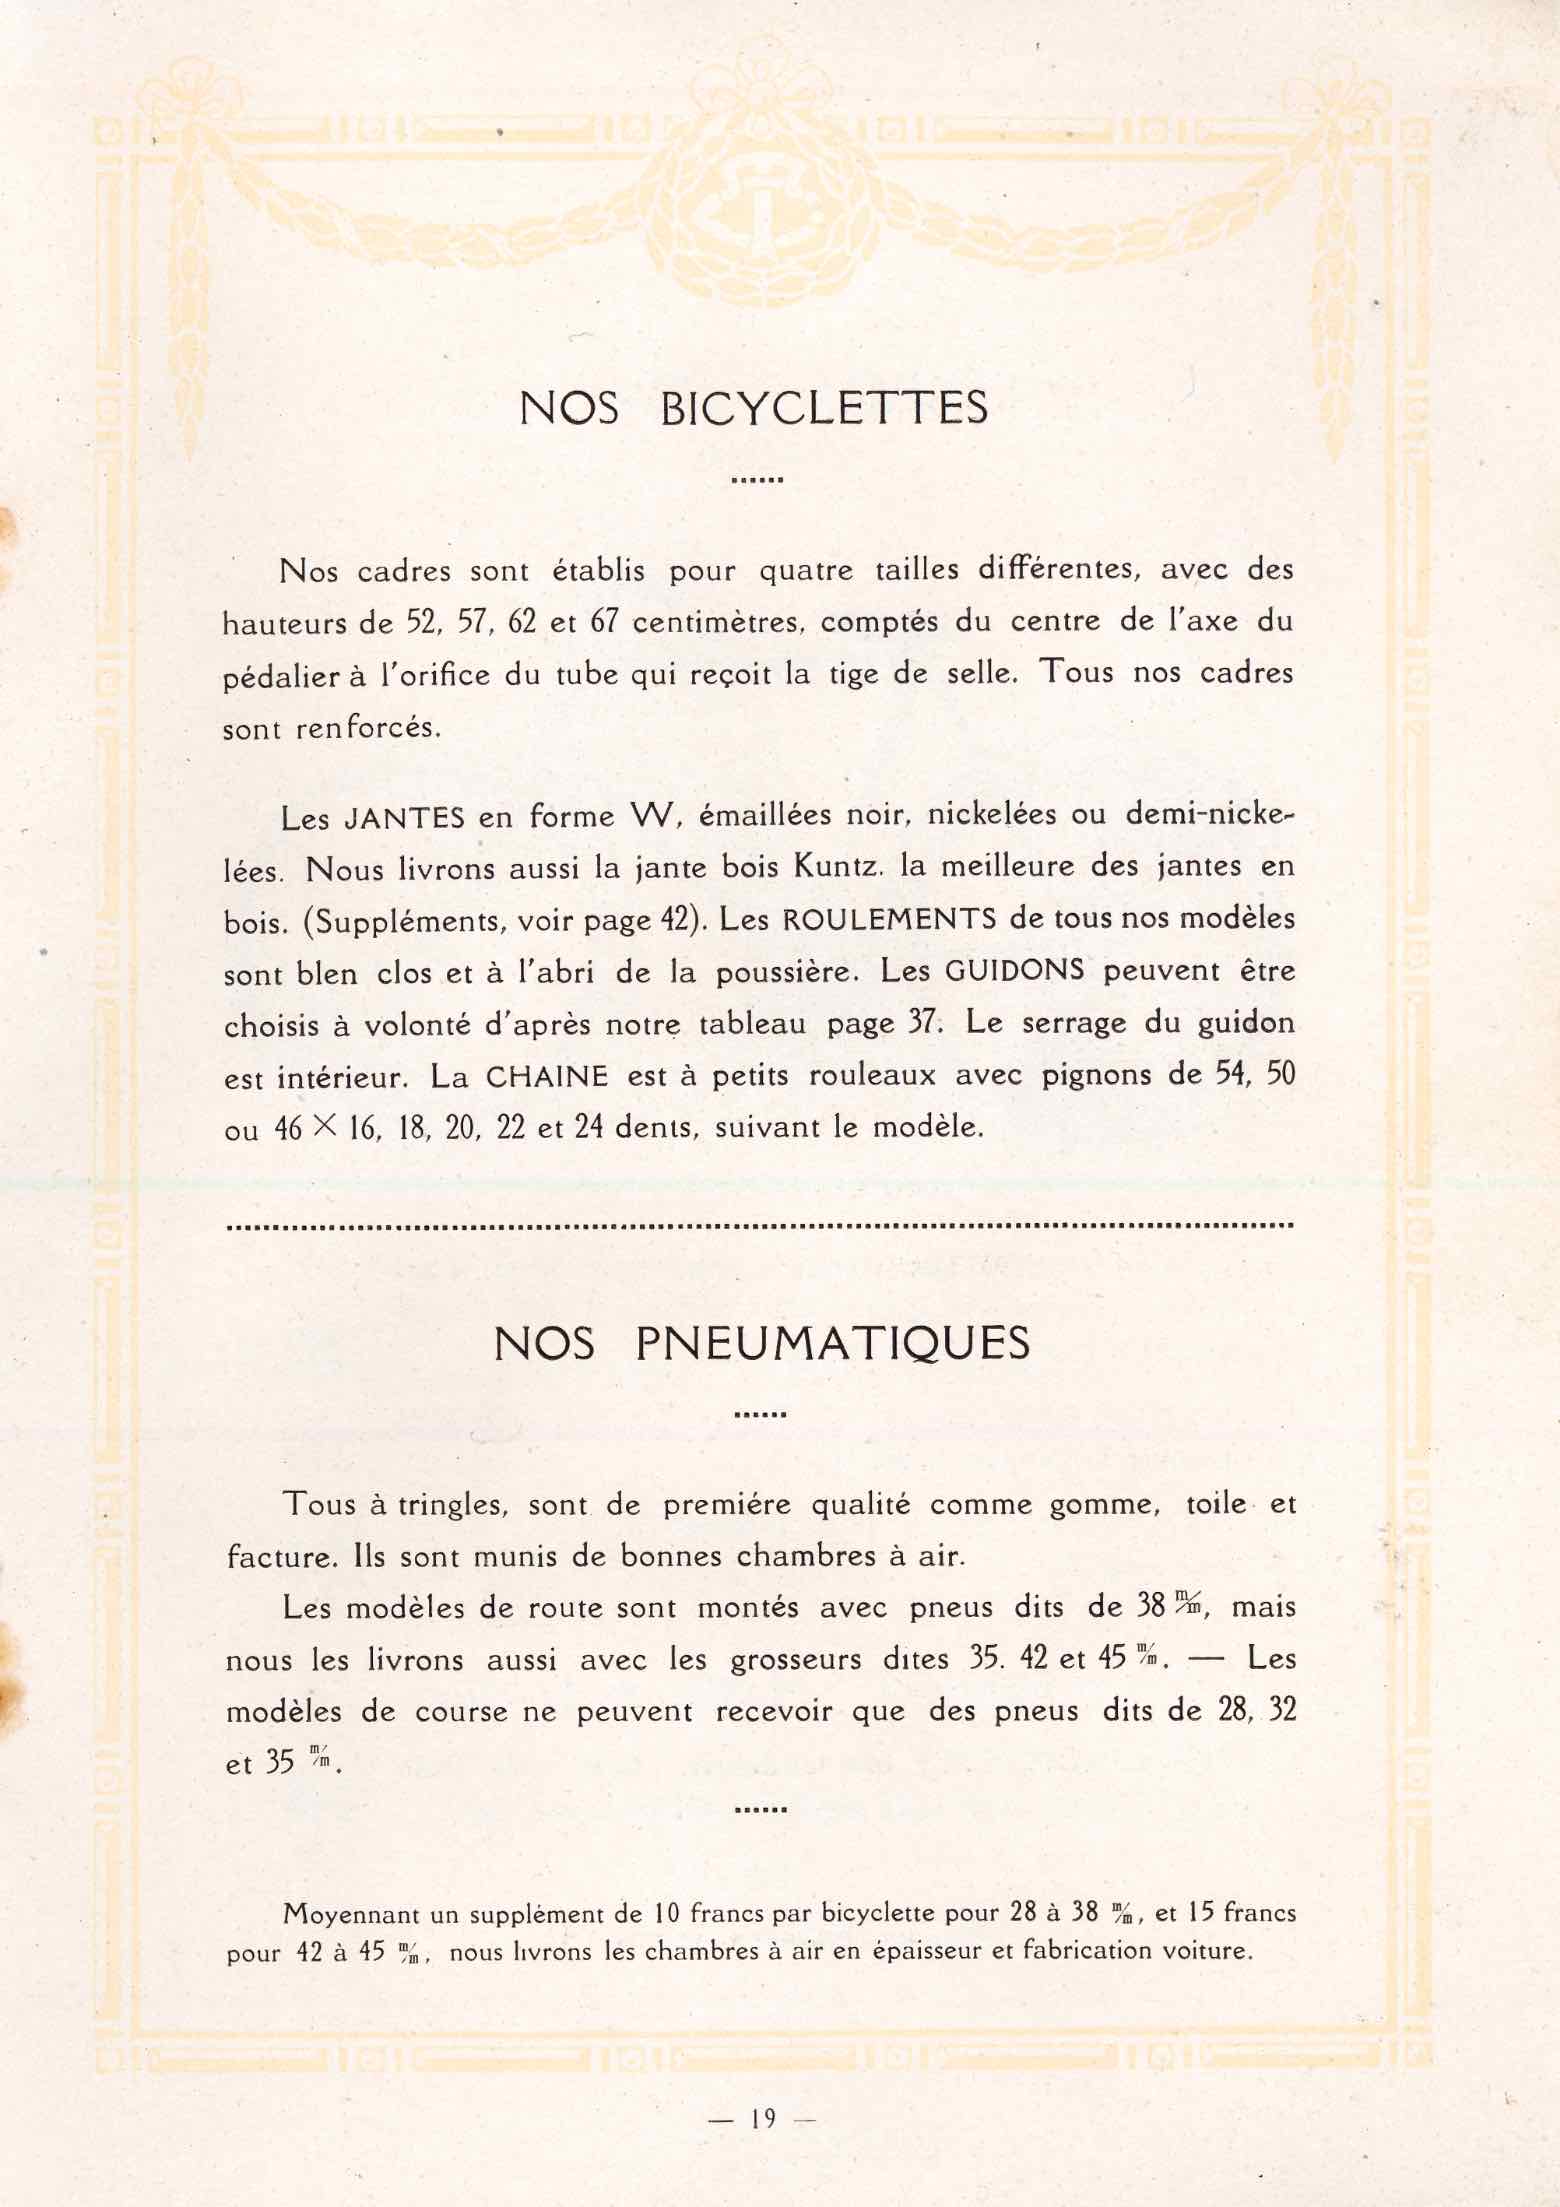 Terrot & Cie - Cycles Motorcyclettes Voiturettes 1914 page 19 main image